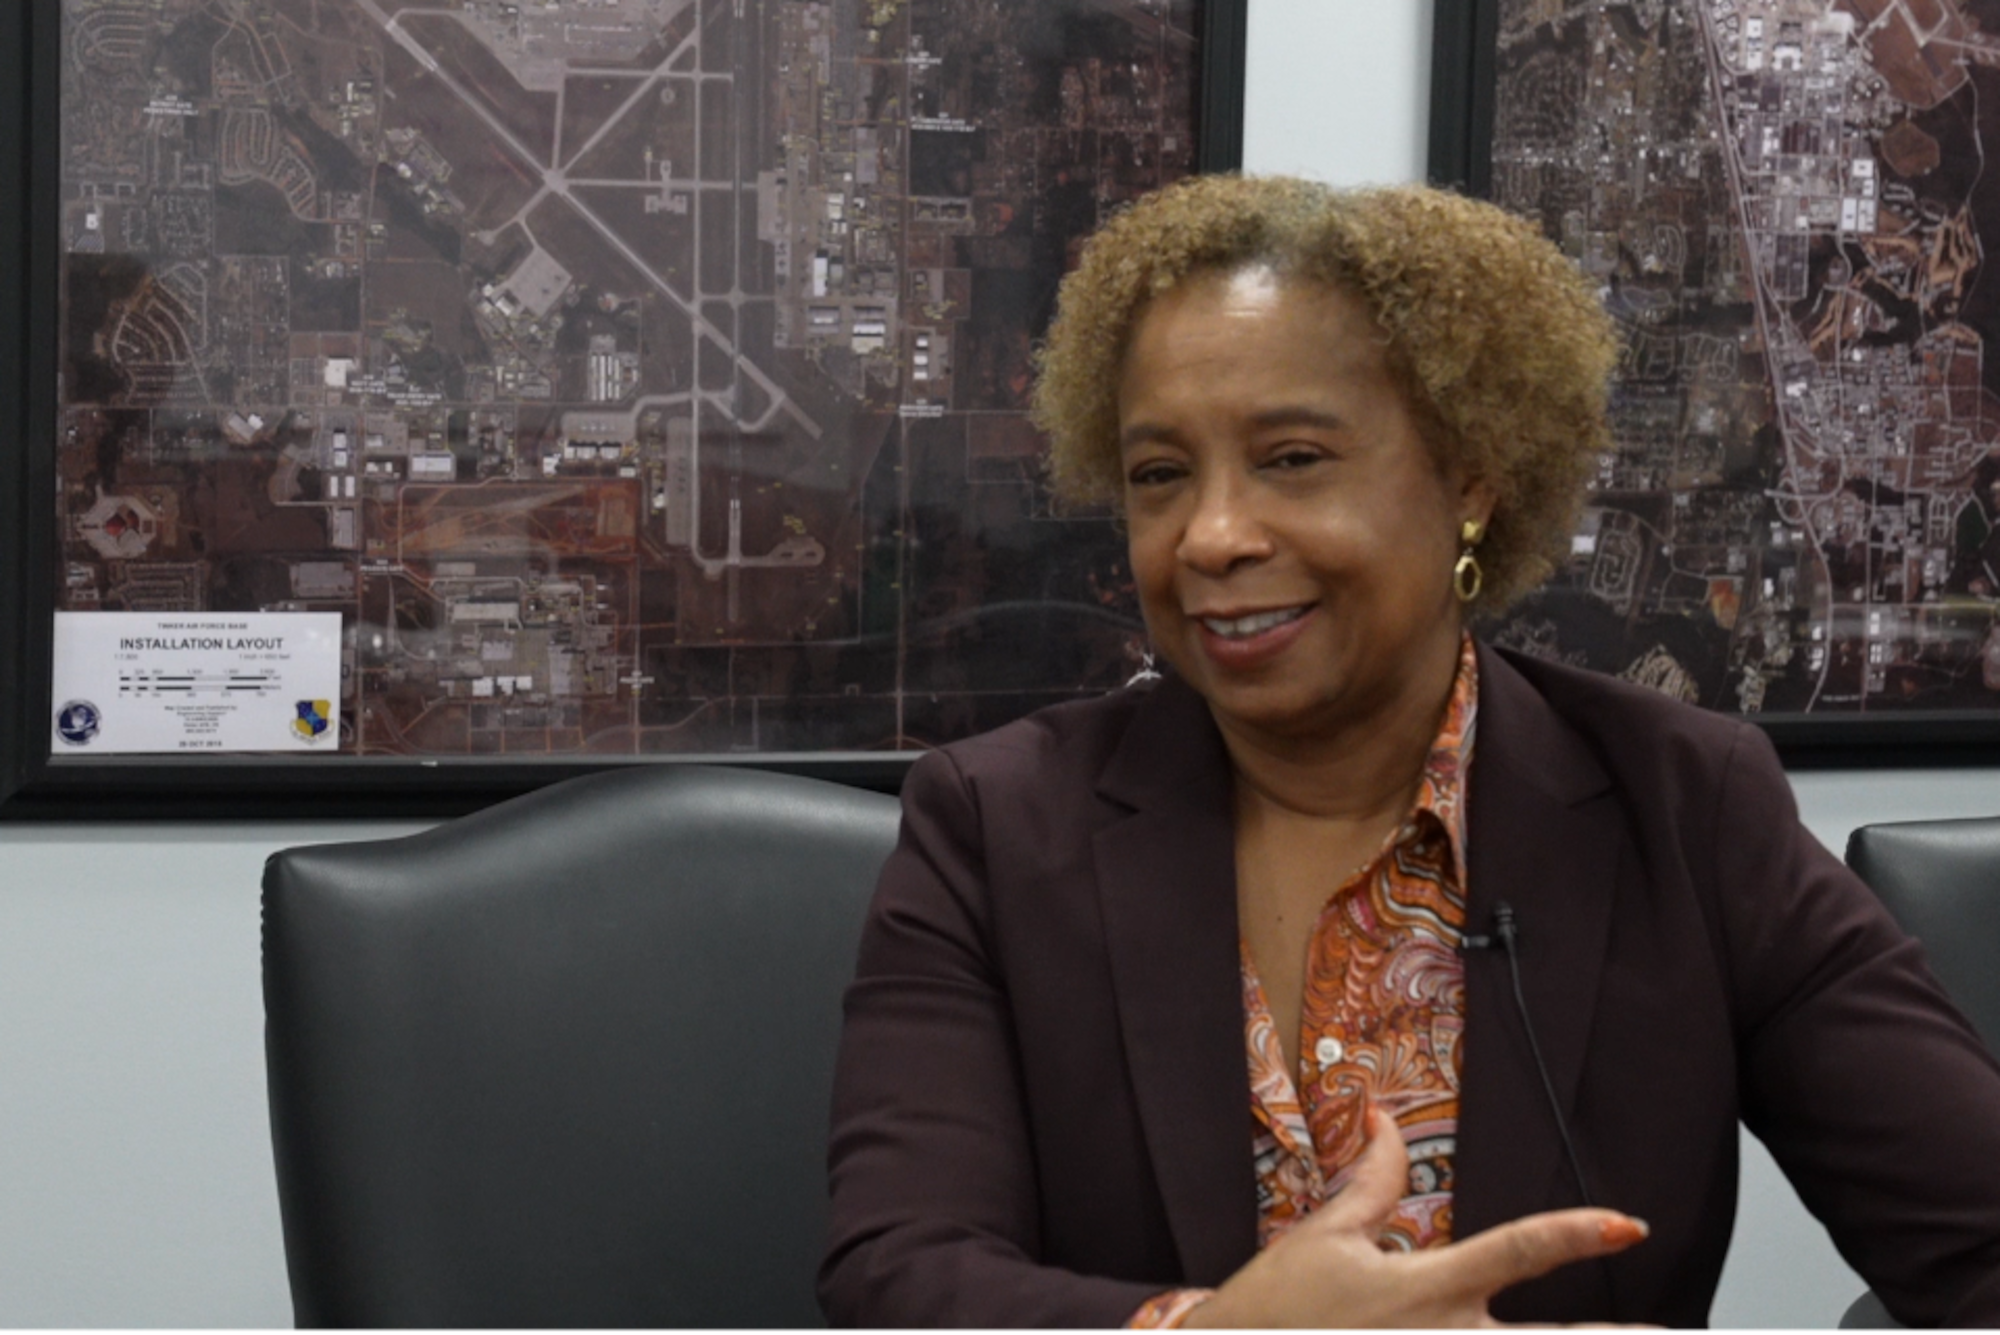 Ms. Wendy Walden, director of staff for the AFSC, talks about her mentoring experiences throughout her career and helping others meet their professional goals. Part I